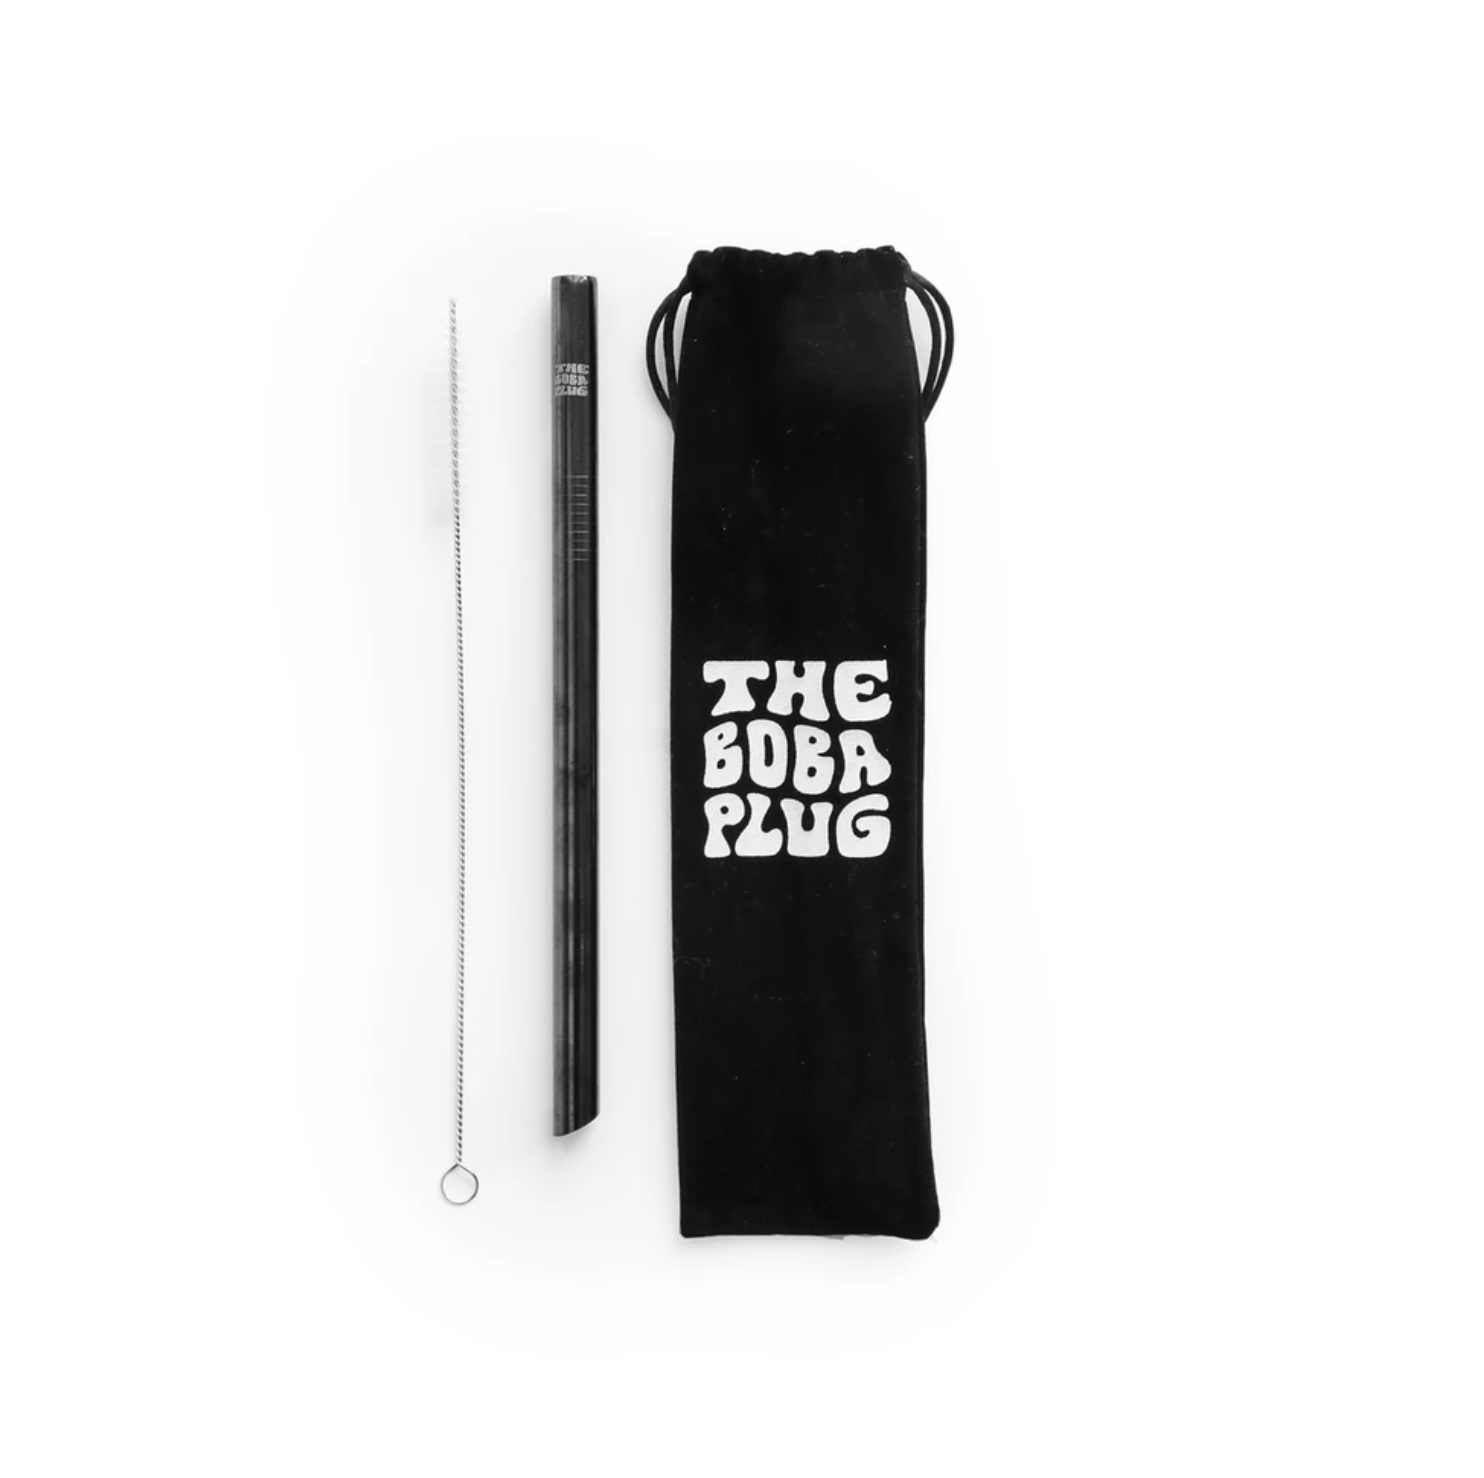 black stainless steel boba straw with cleaner and drawstring bag